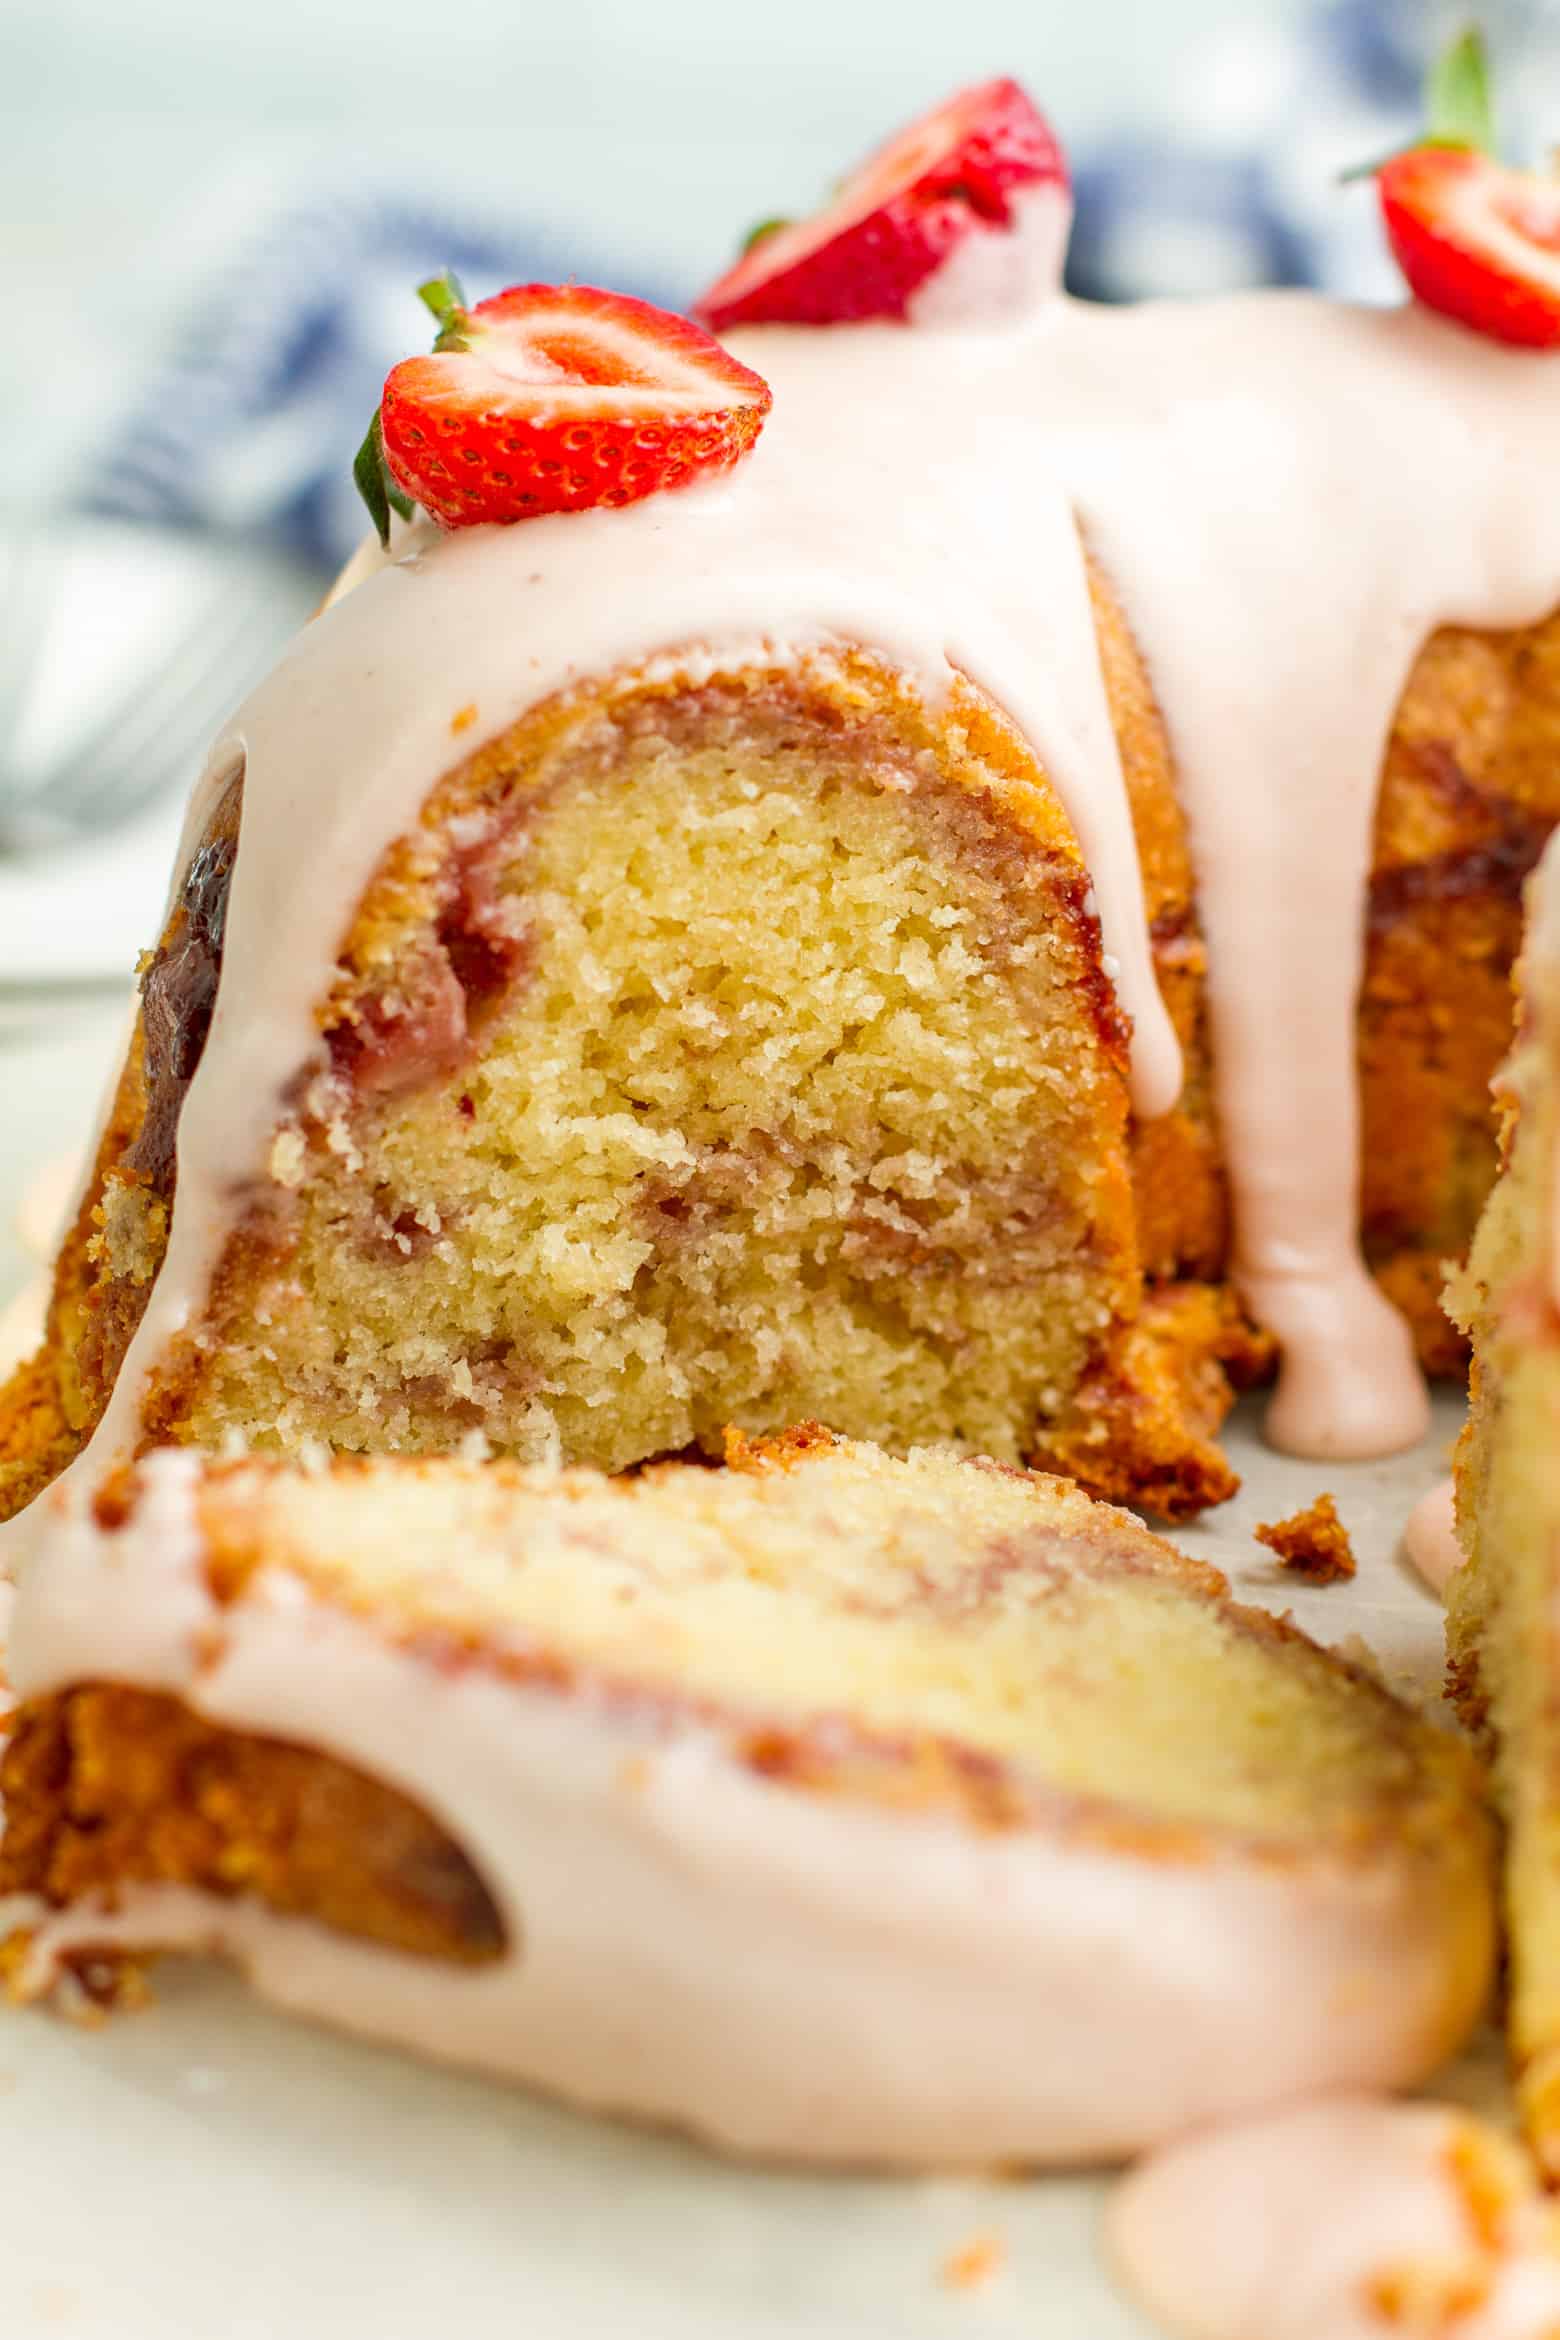 Strawberry pound cake with a slice laying next to it.